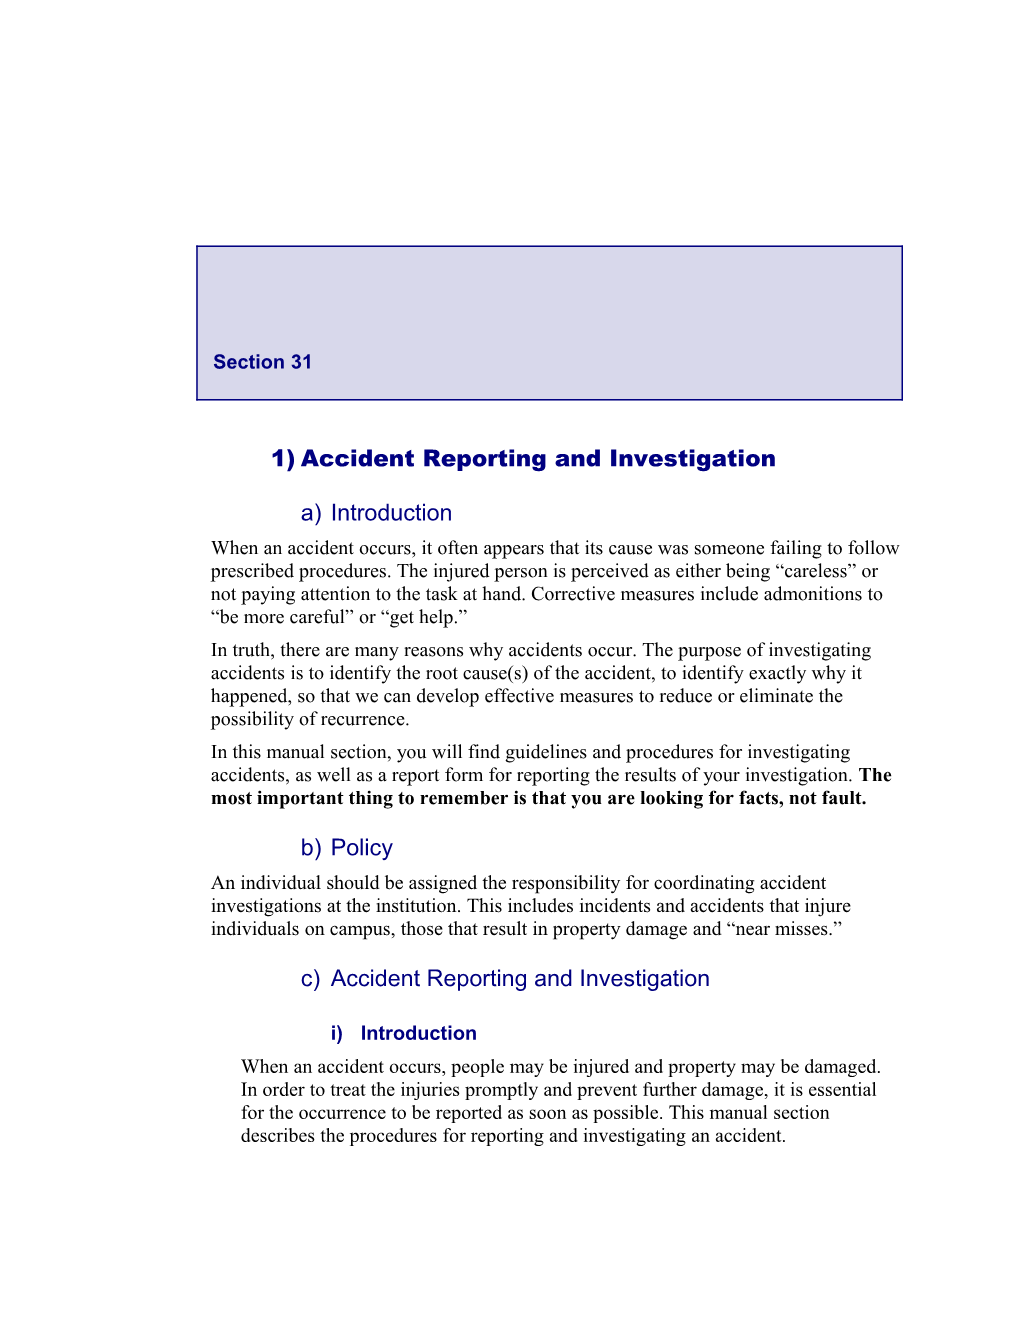 1)Accident Reporting and Investigation